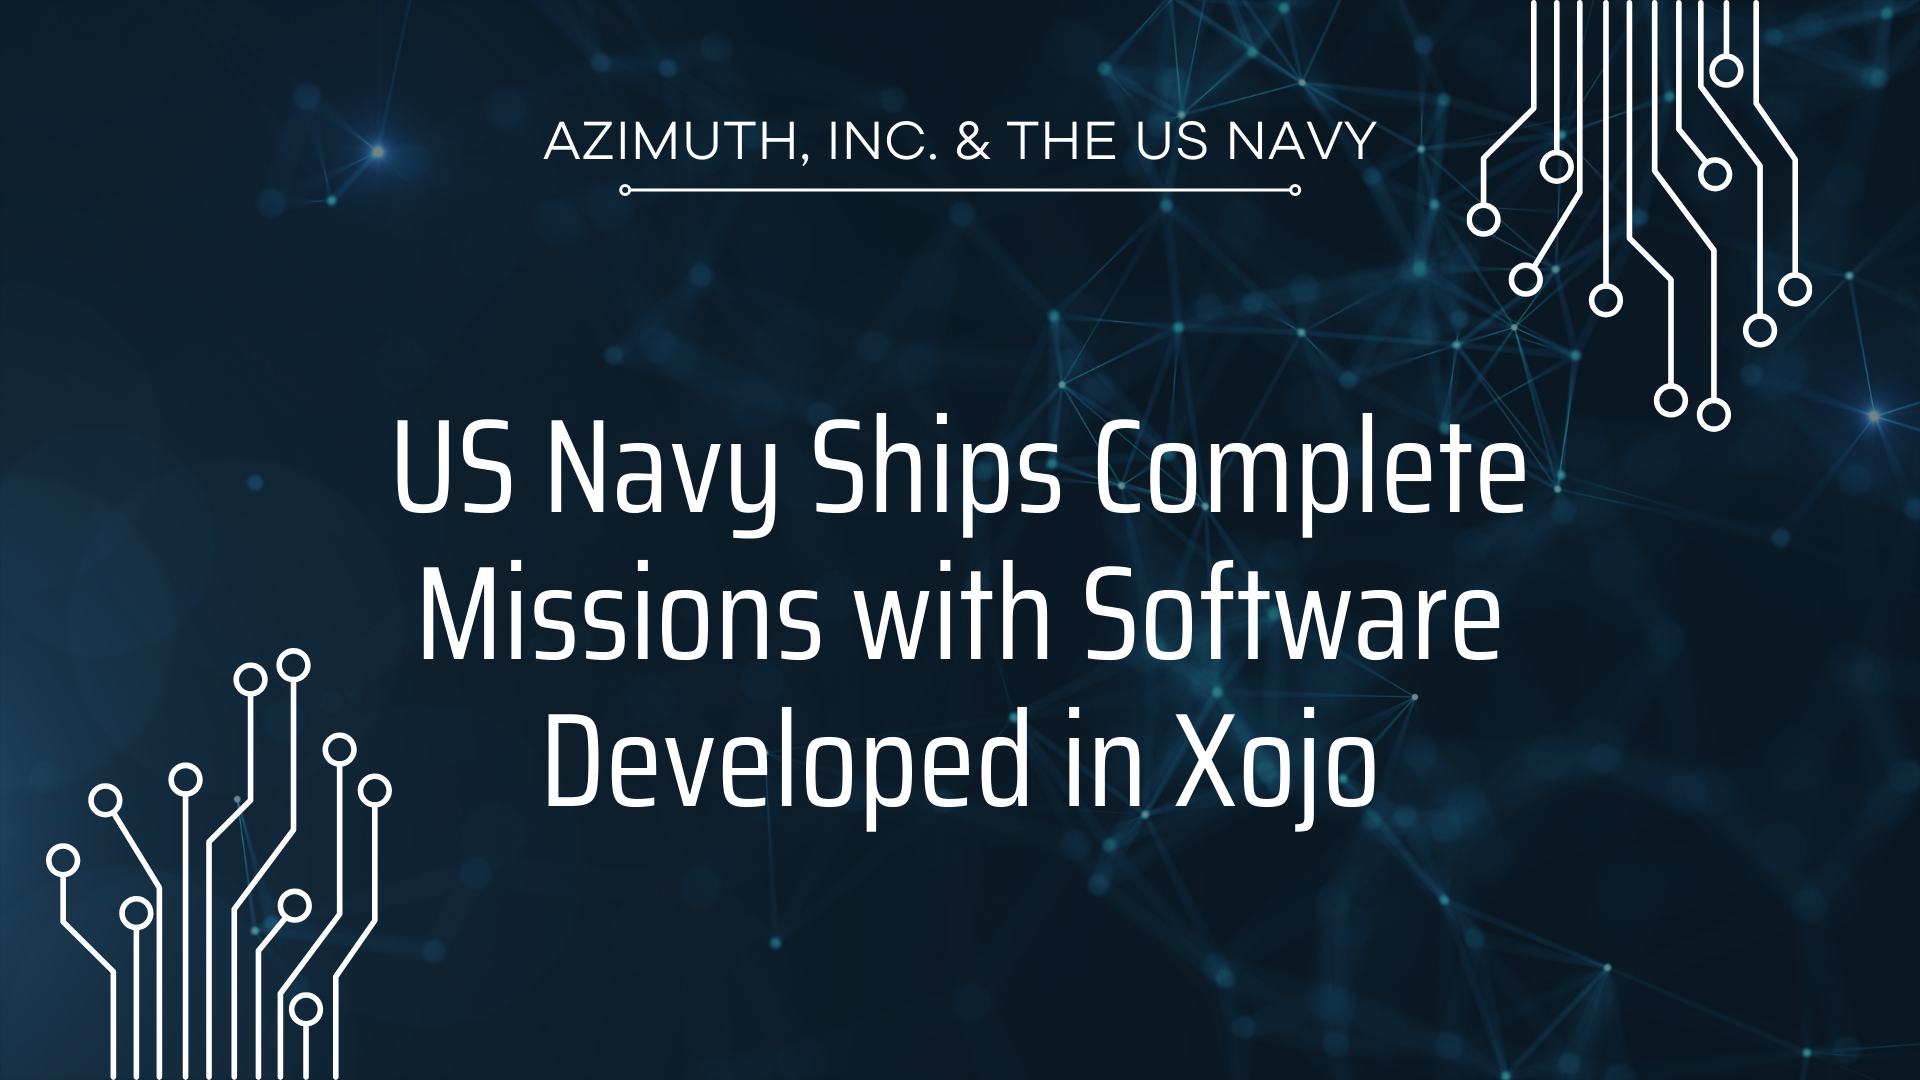 US Navy and Azimuth